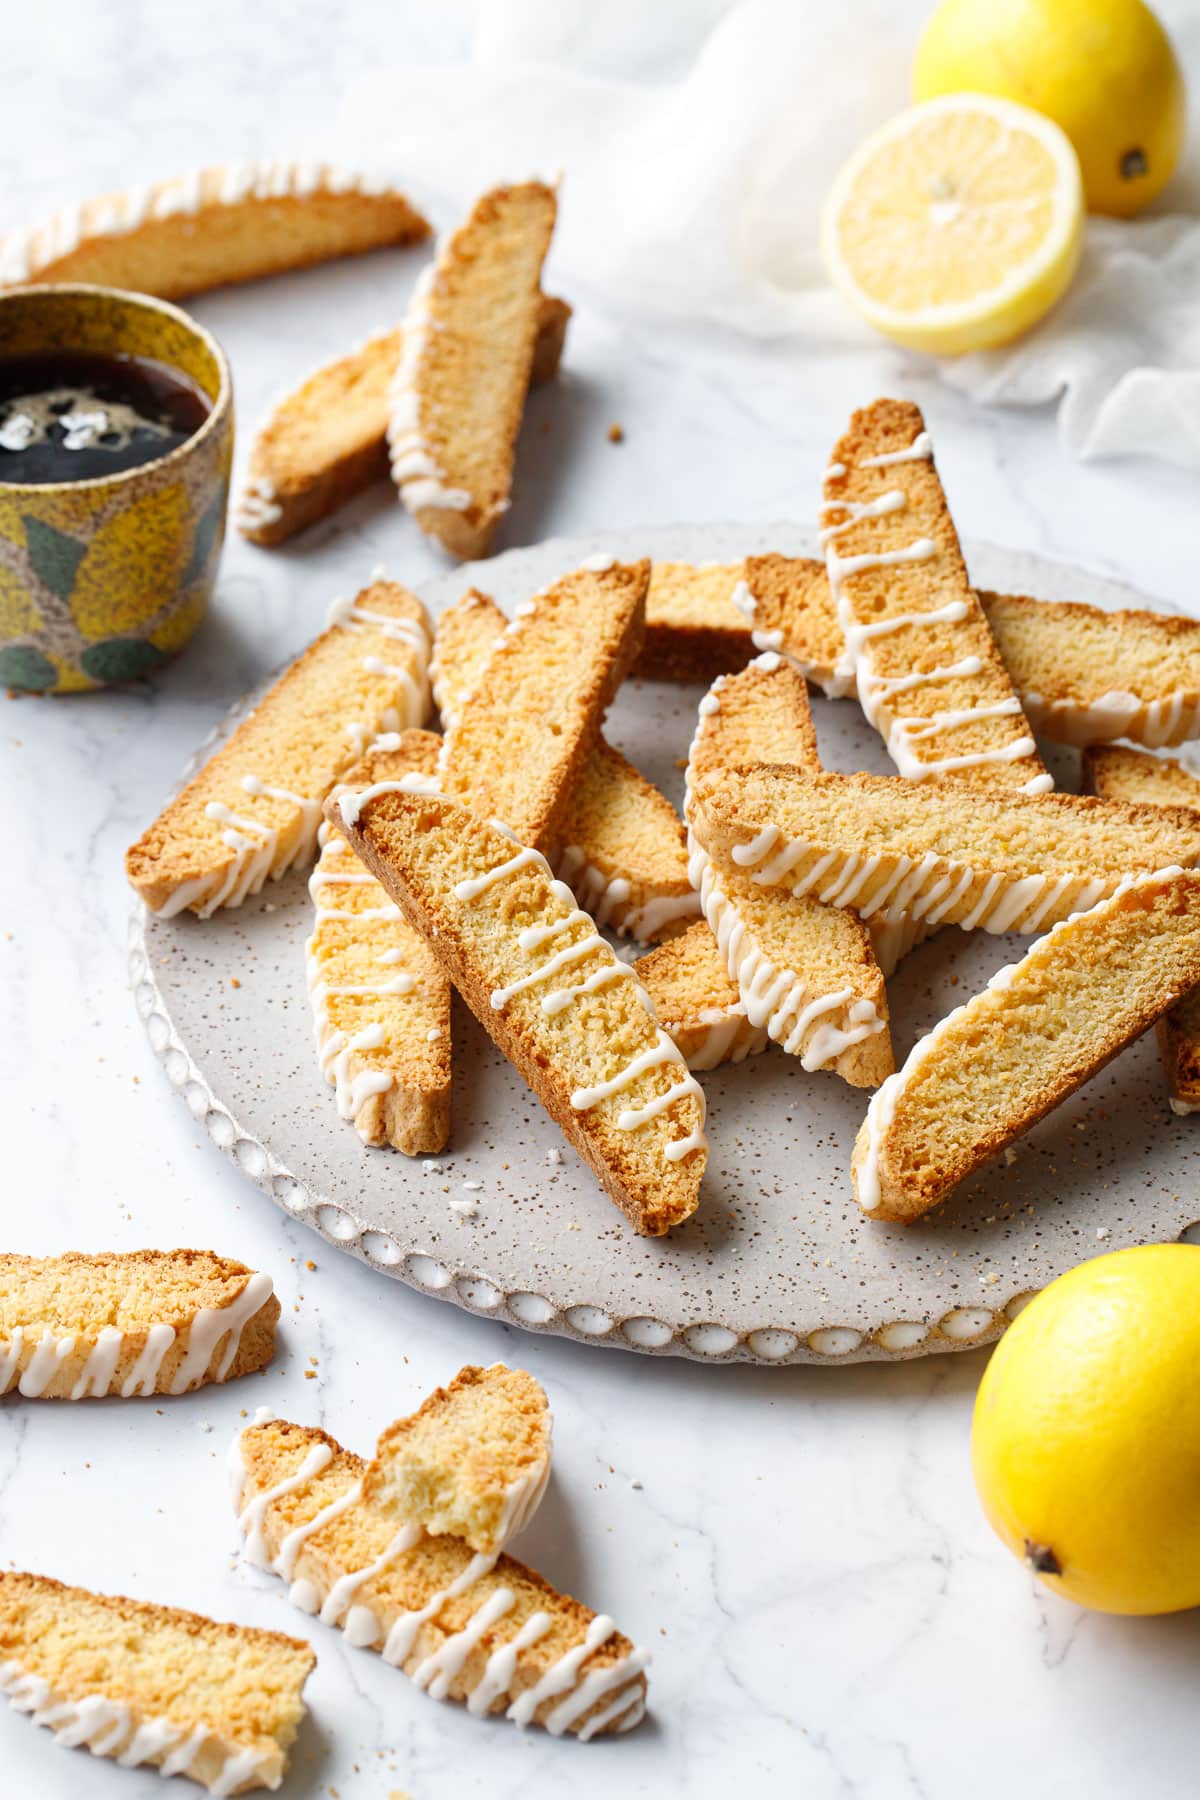 Pile of Glazed Meyer Lemon Biscotti on a ceramic cake plate, with more cookies, a lemon, and a small cup of espresso on the side.